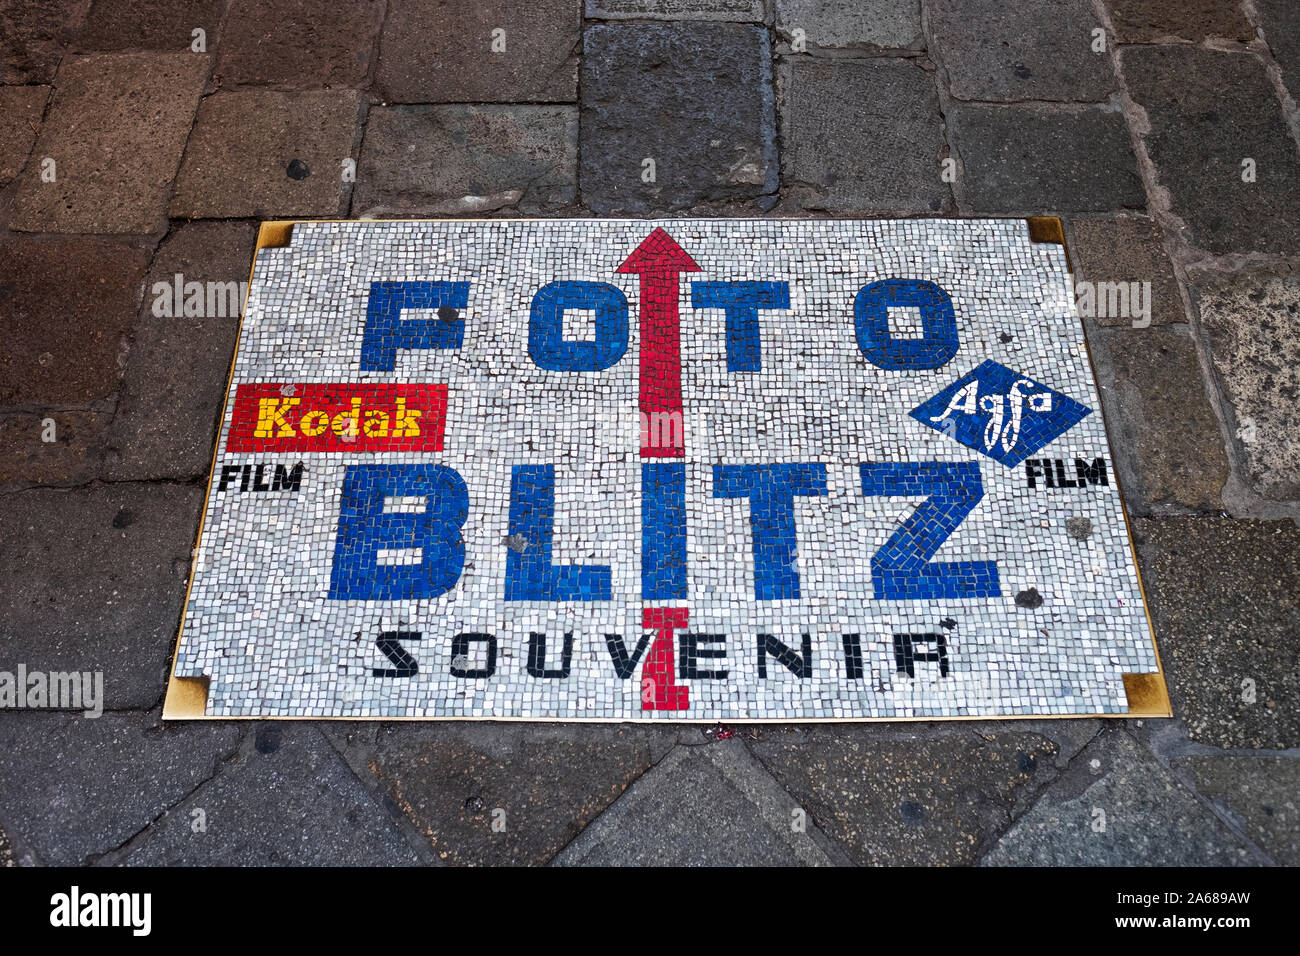 A mosaic sign on the ground pointing tourist & residents to Foto Blitz, a camera, film & digital imaging store on Calle dei Baloni in Venice, Italy Stock Photo